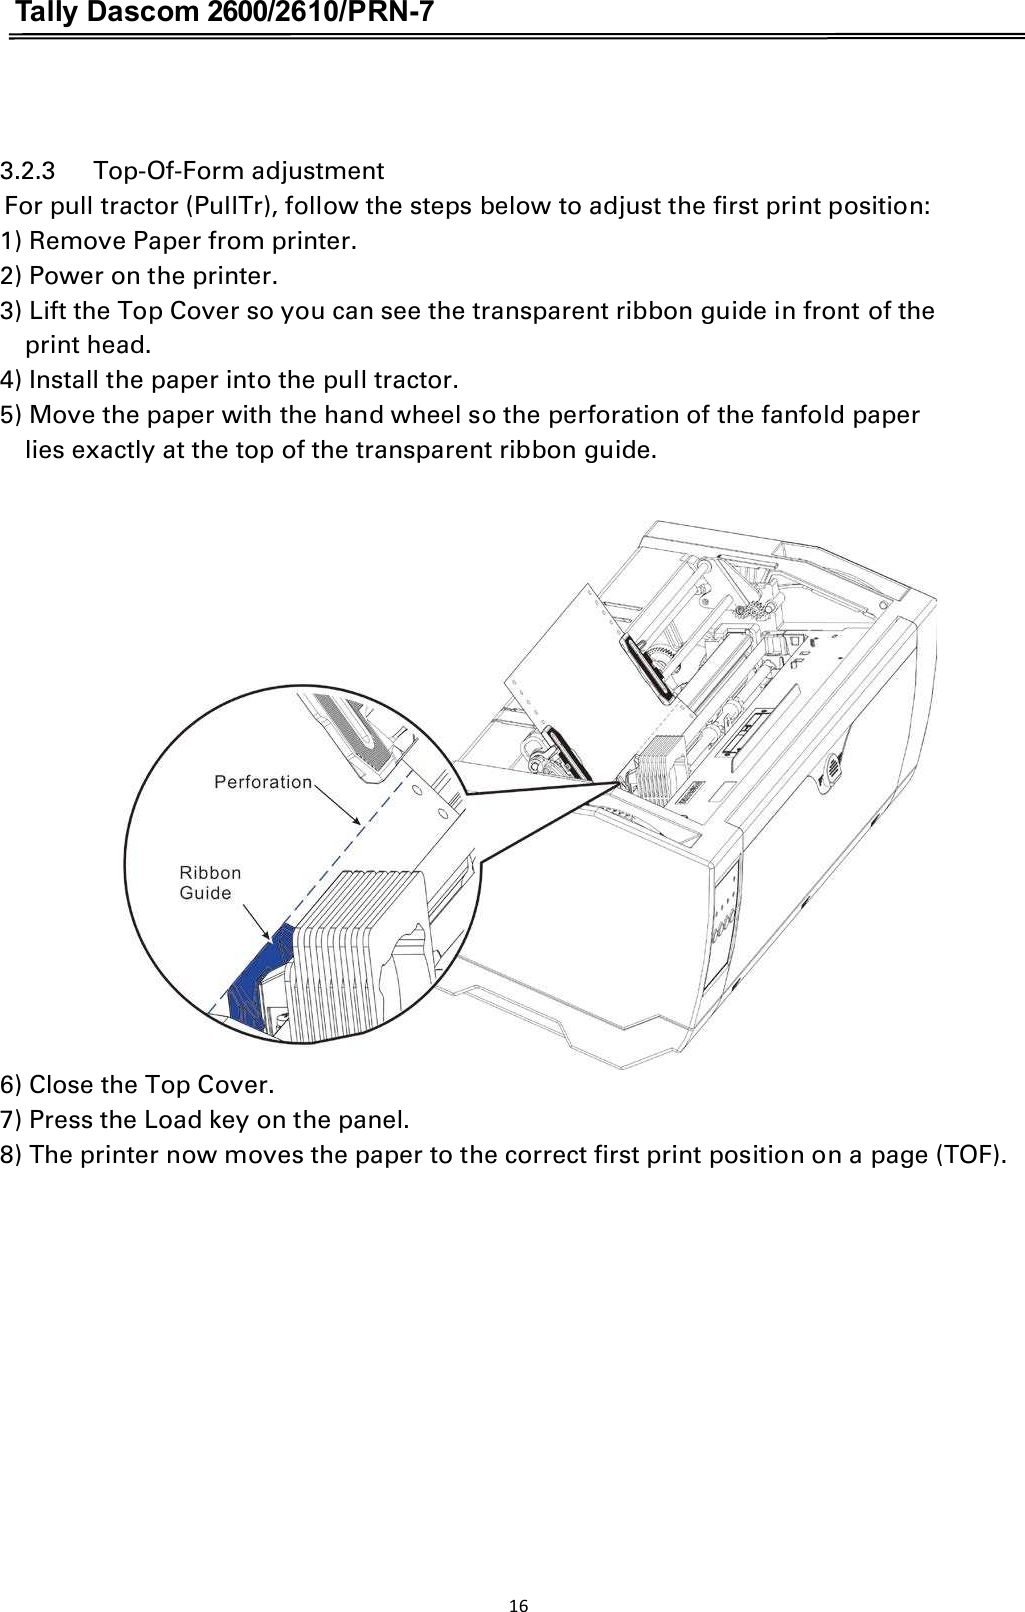 Tally Dascom 2600/2610/PRN-7   3.2.3      Top-Of-Form adjustment For pull tractor (PullTr), follow the steps below to adjust the first print position: 1) Remove Paper from printer. 2) Power on the printer. 3) Lift the Top Cover so you can see the transparent ribbon guide in front of the   print head. 4) Install the paper into the pull tractor. 5) Move the paper with the hand wheel so the perforation of the fanfold paper   lies exactly at the top of the transparent ribbon guide.   6) Close the Top Cover. 7) Press the Load key on the panel. 8) The printer now moves the paper to the correct first print position on a page (TOF). 16  